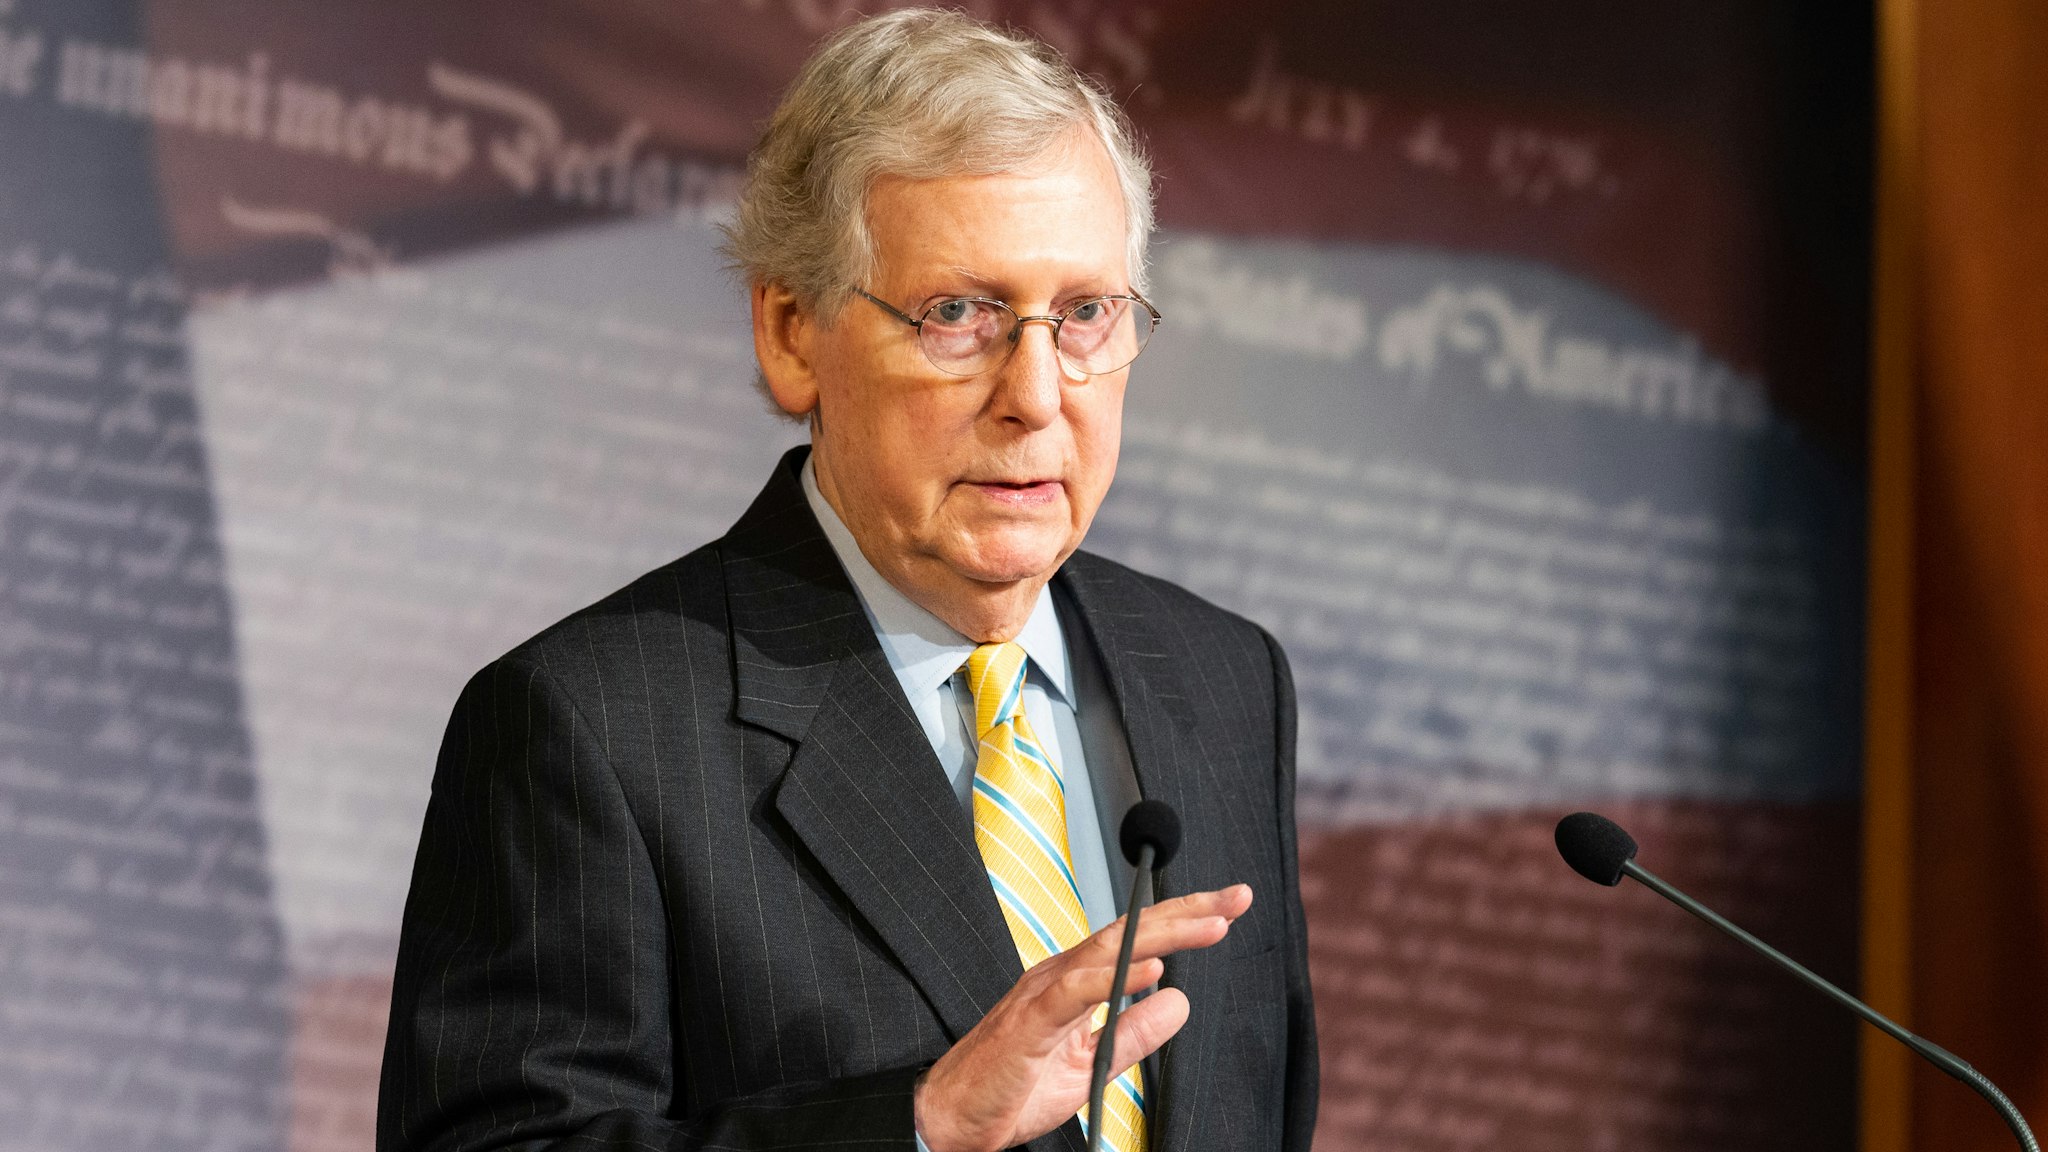 WASHINGTON, D C , UNITED STATES - 2019/06/27: Senate Majority Leader Mitch McConnell (R-KY) speaking at a press conference at the US Capitol in Washington, DC.